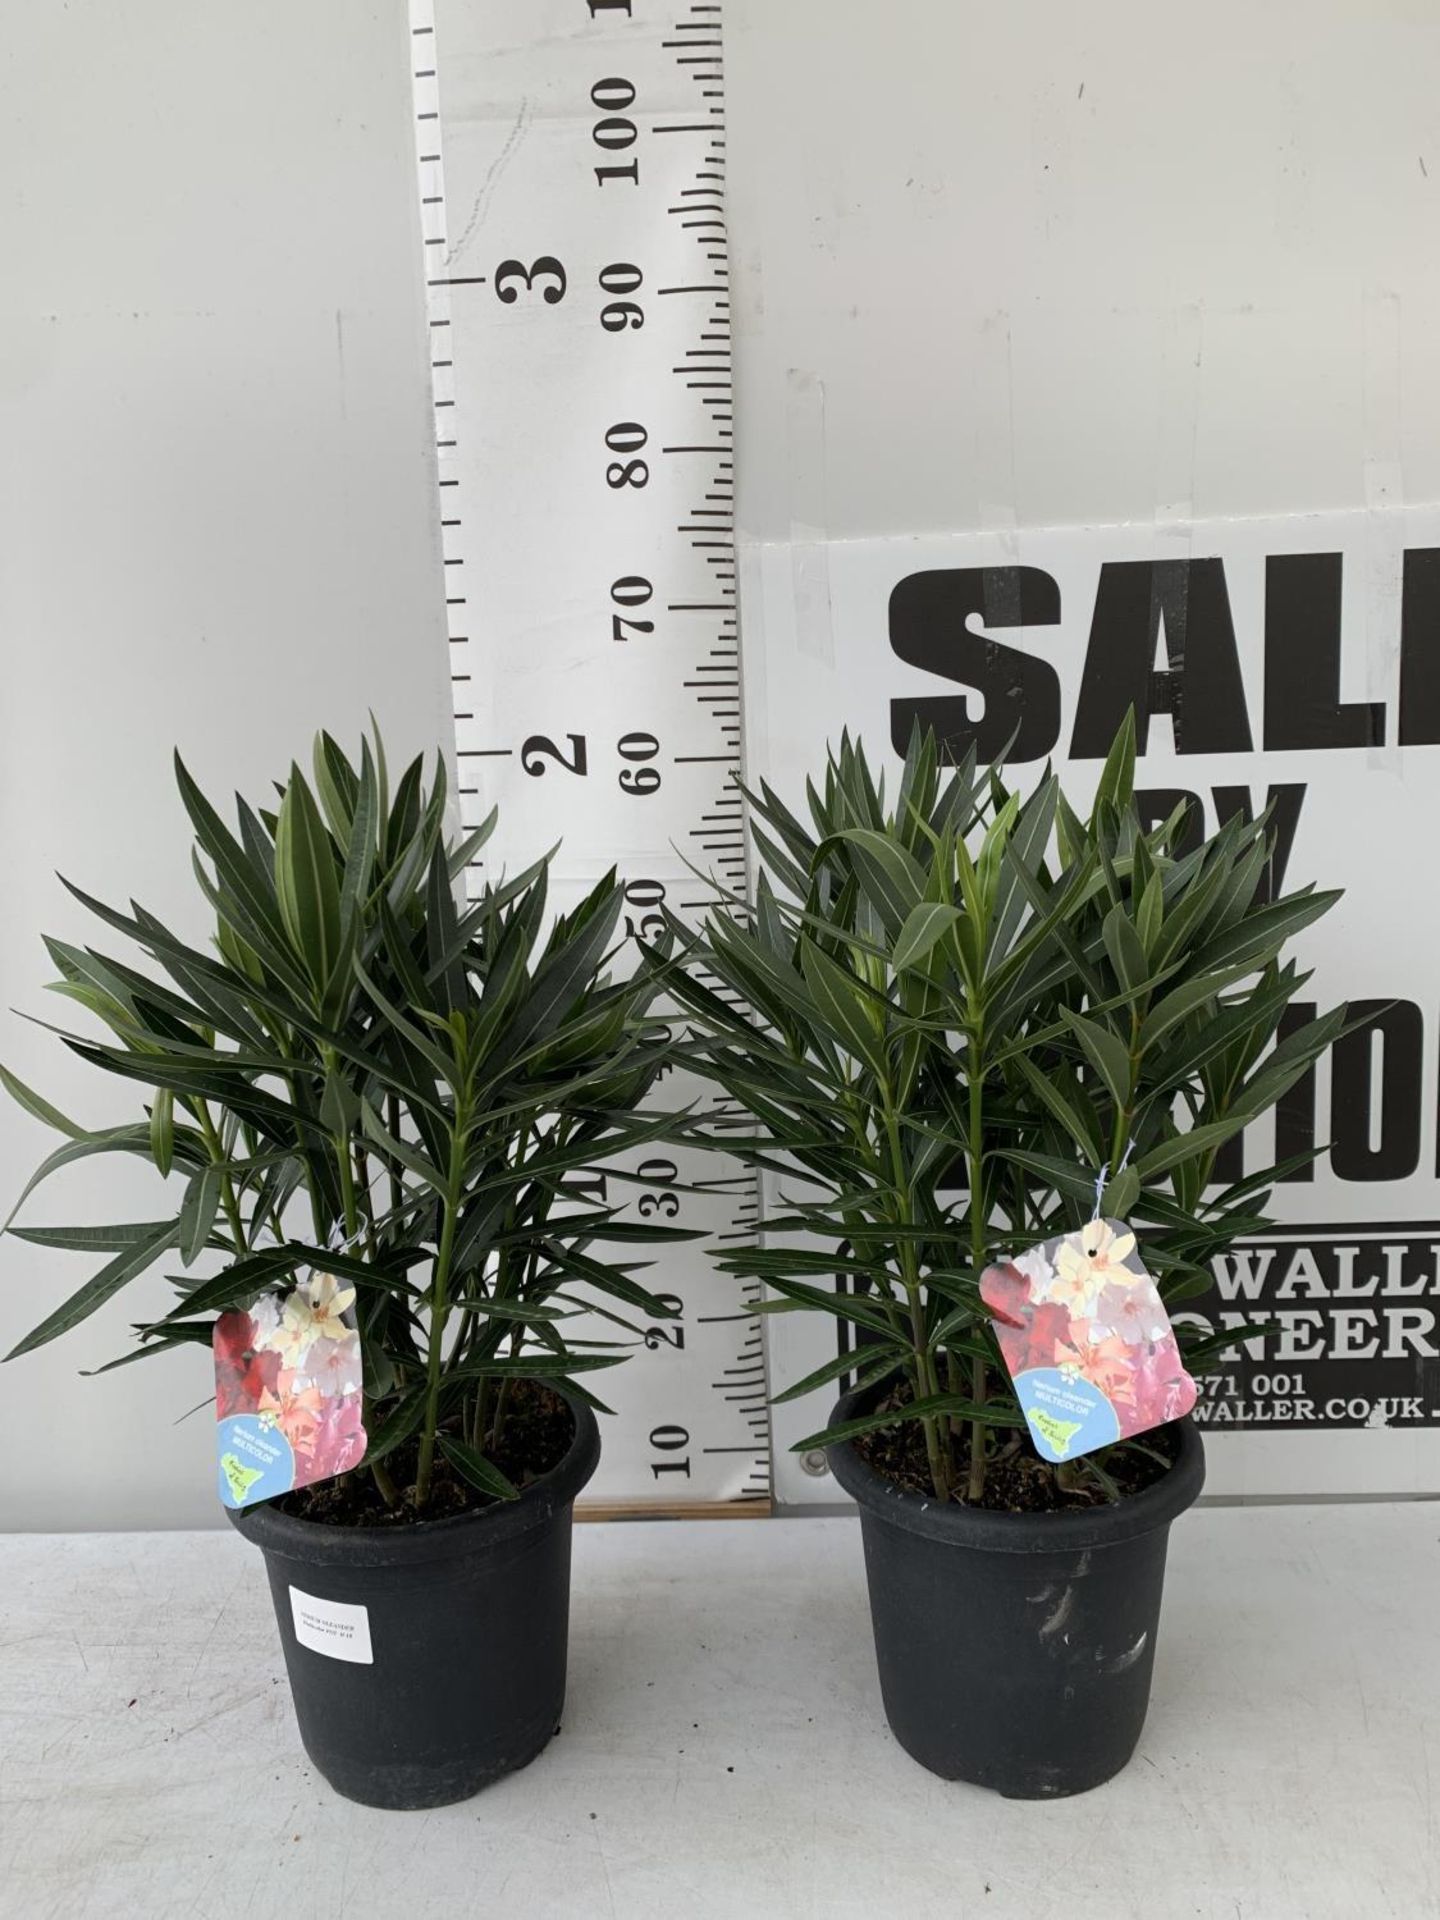 TWO OLEANDER NERIUM SHRUBS MULTICOLOURED APPROX 60CM TALL IN 4 LTR POTS PLUS VAT TO BE SOLD FOR - Image 2 of 10